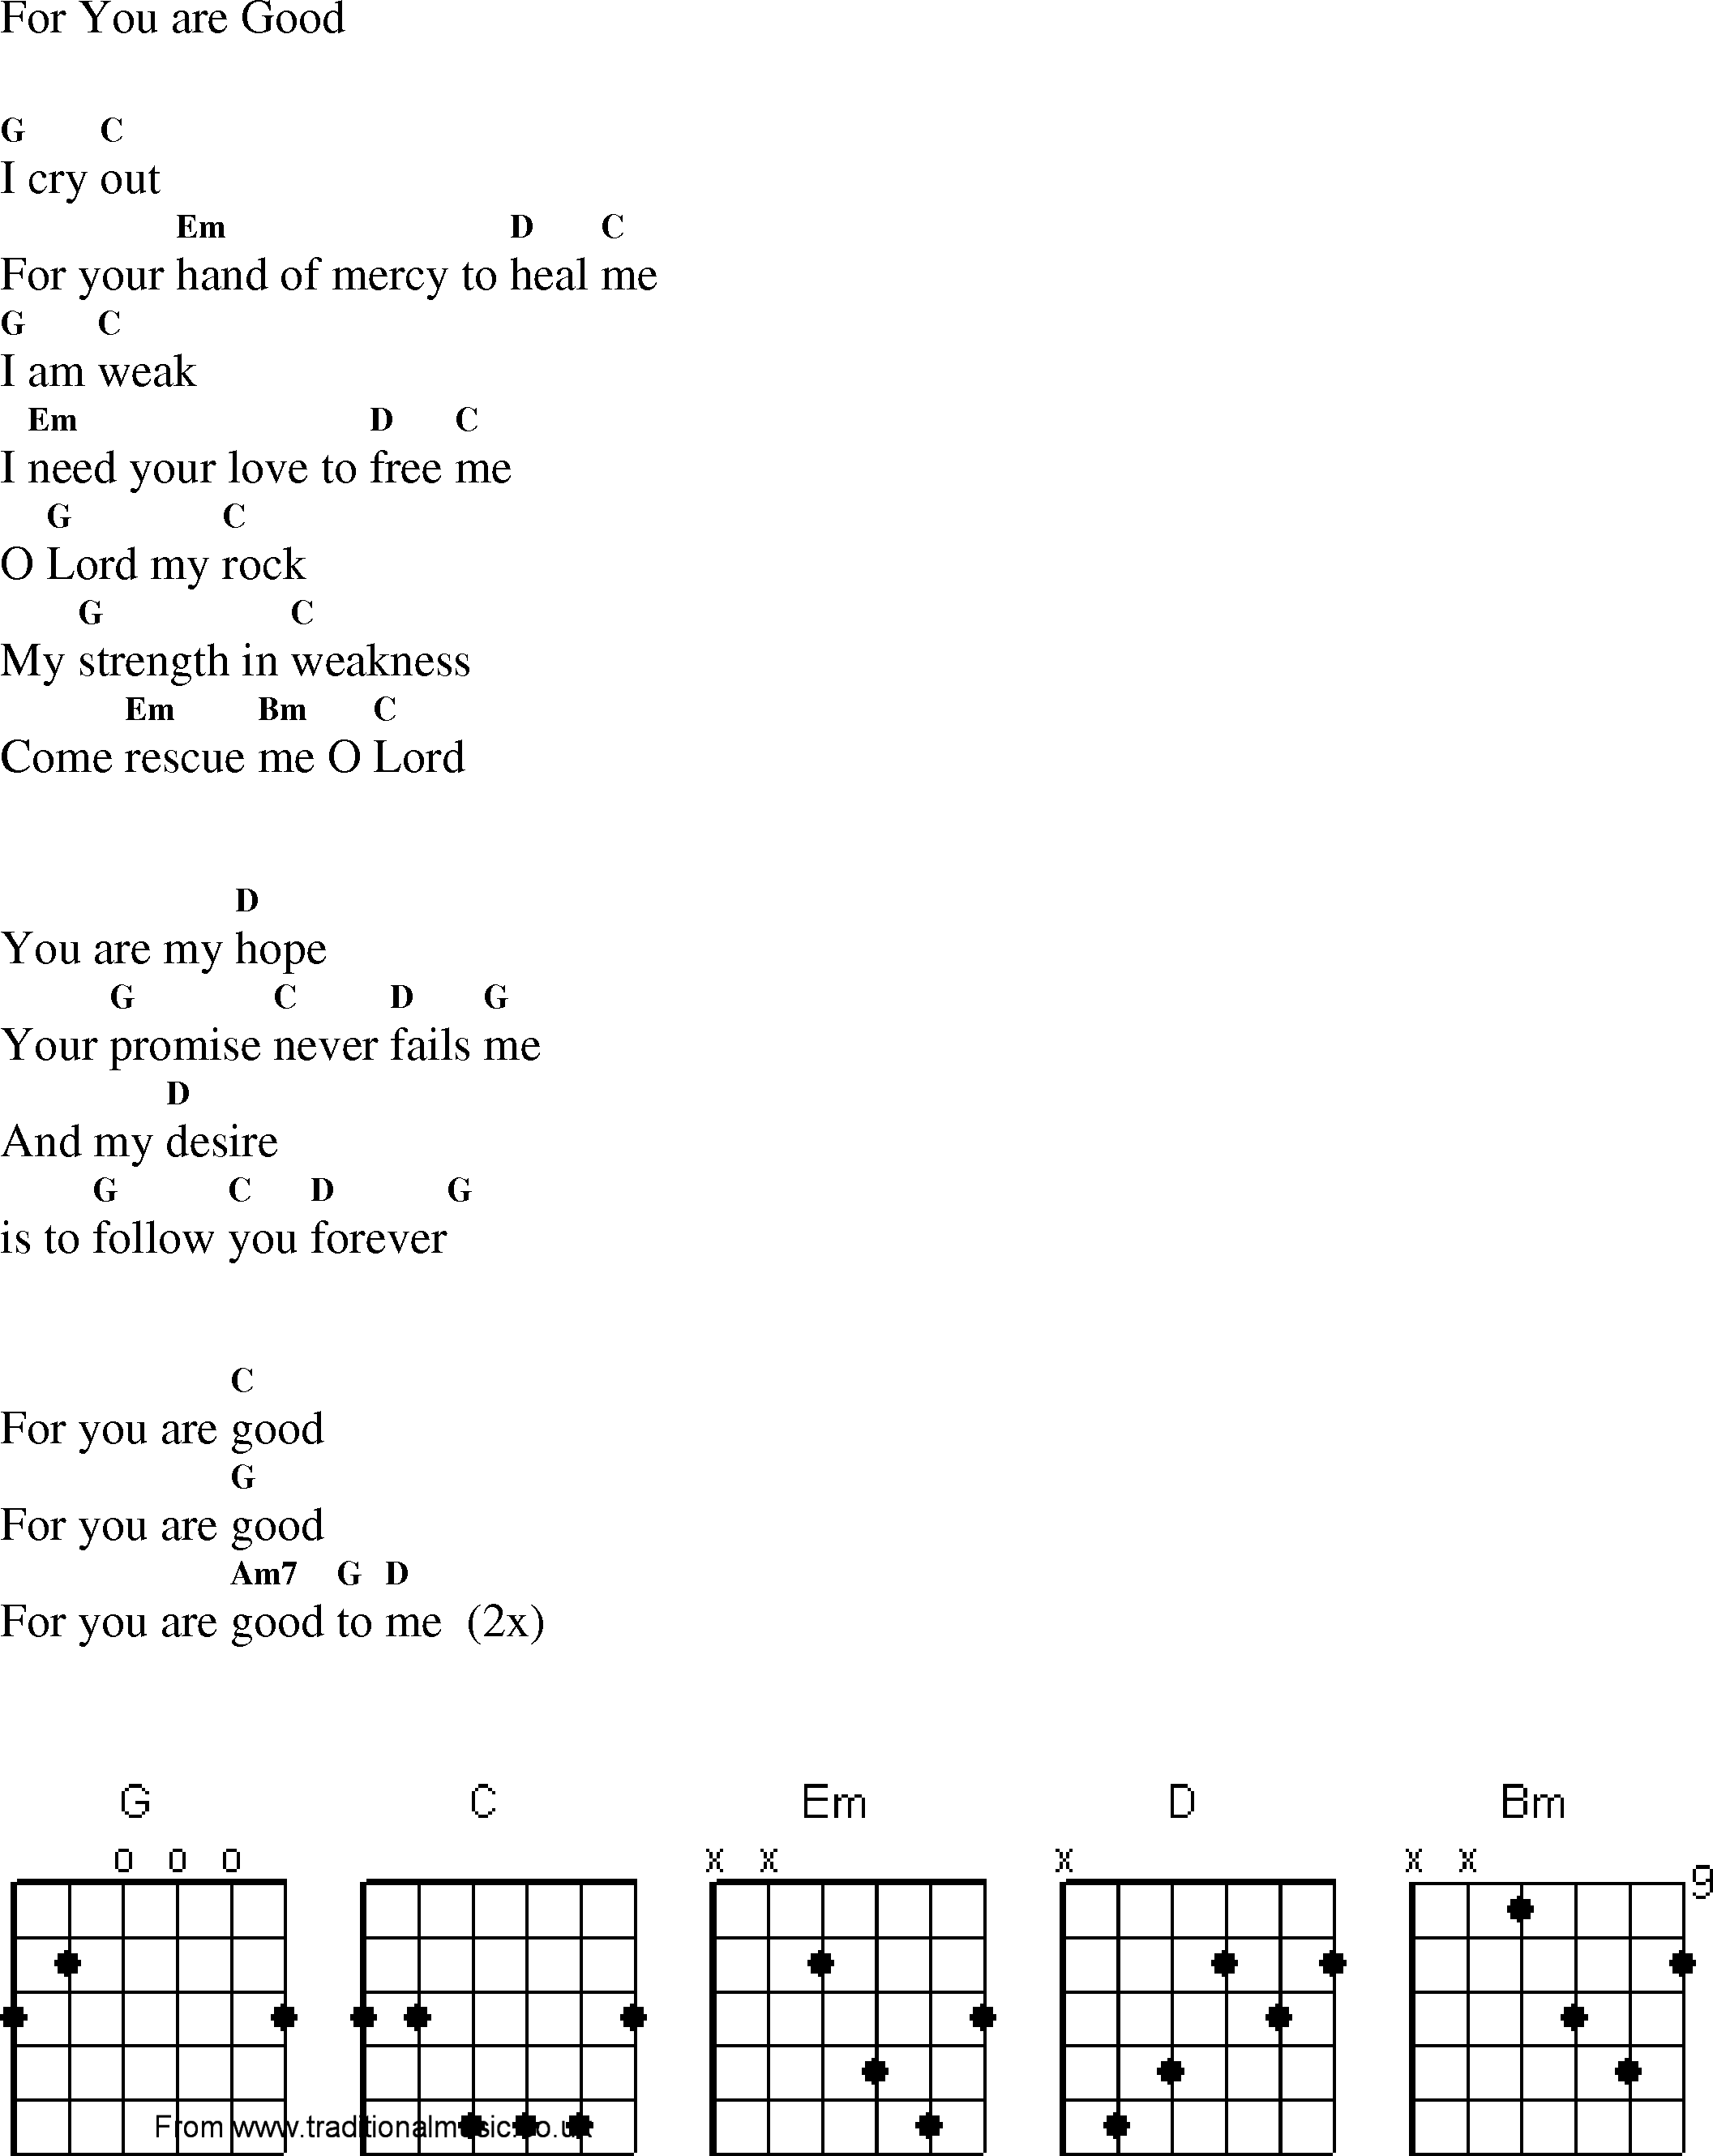 Gospel Song: for_you_are_good, lyrics and chords.